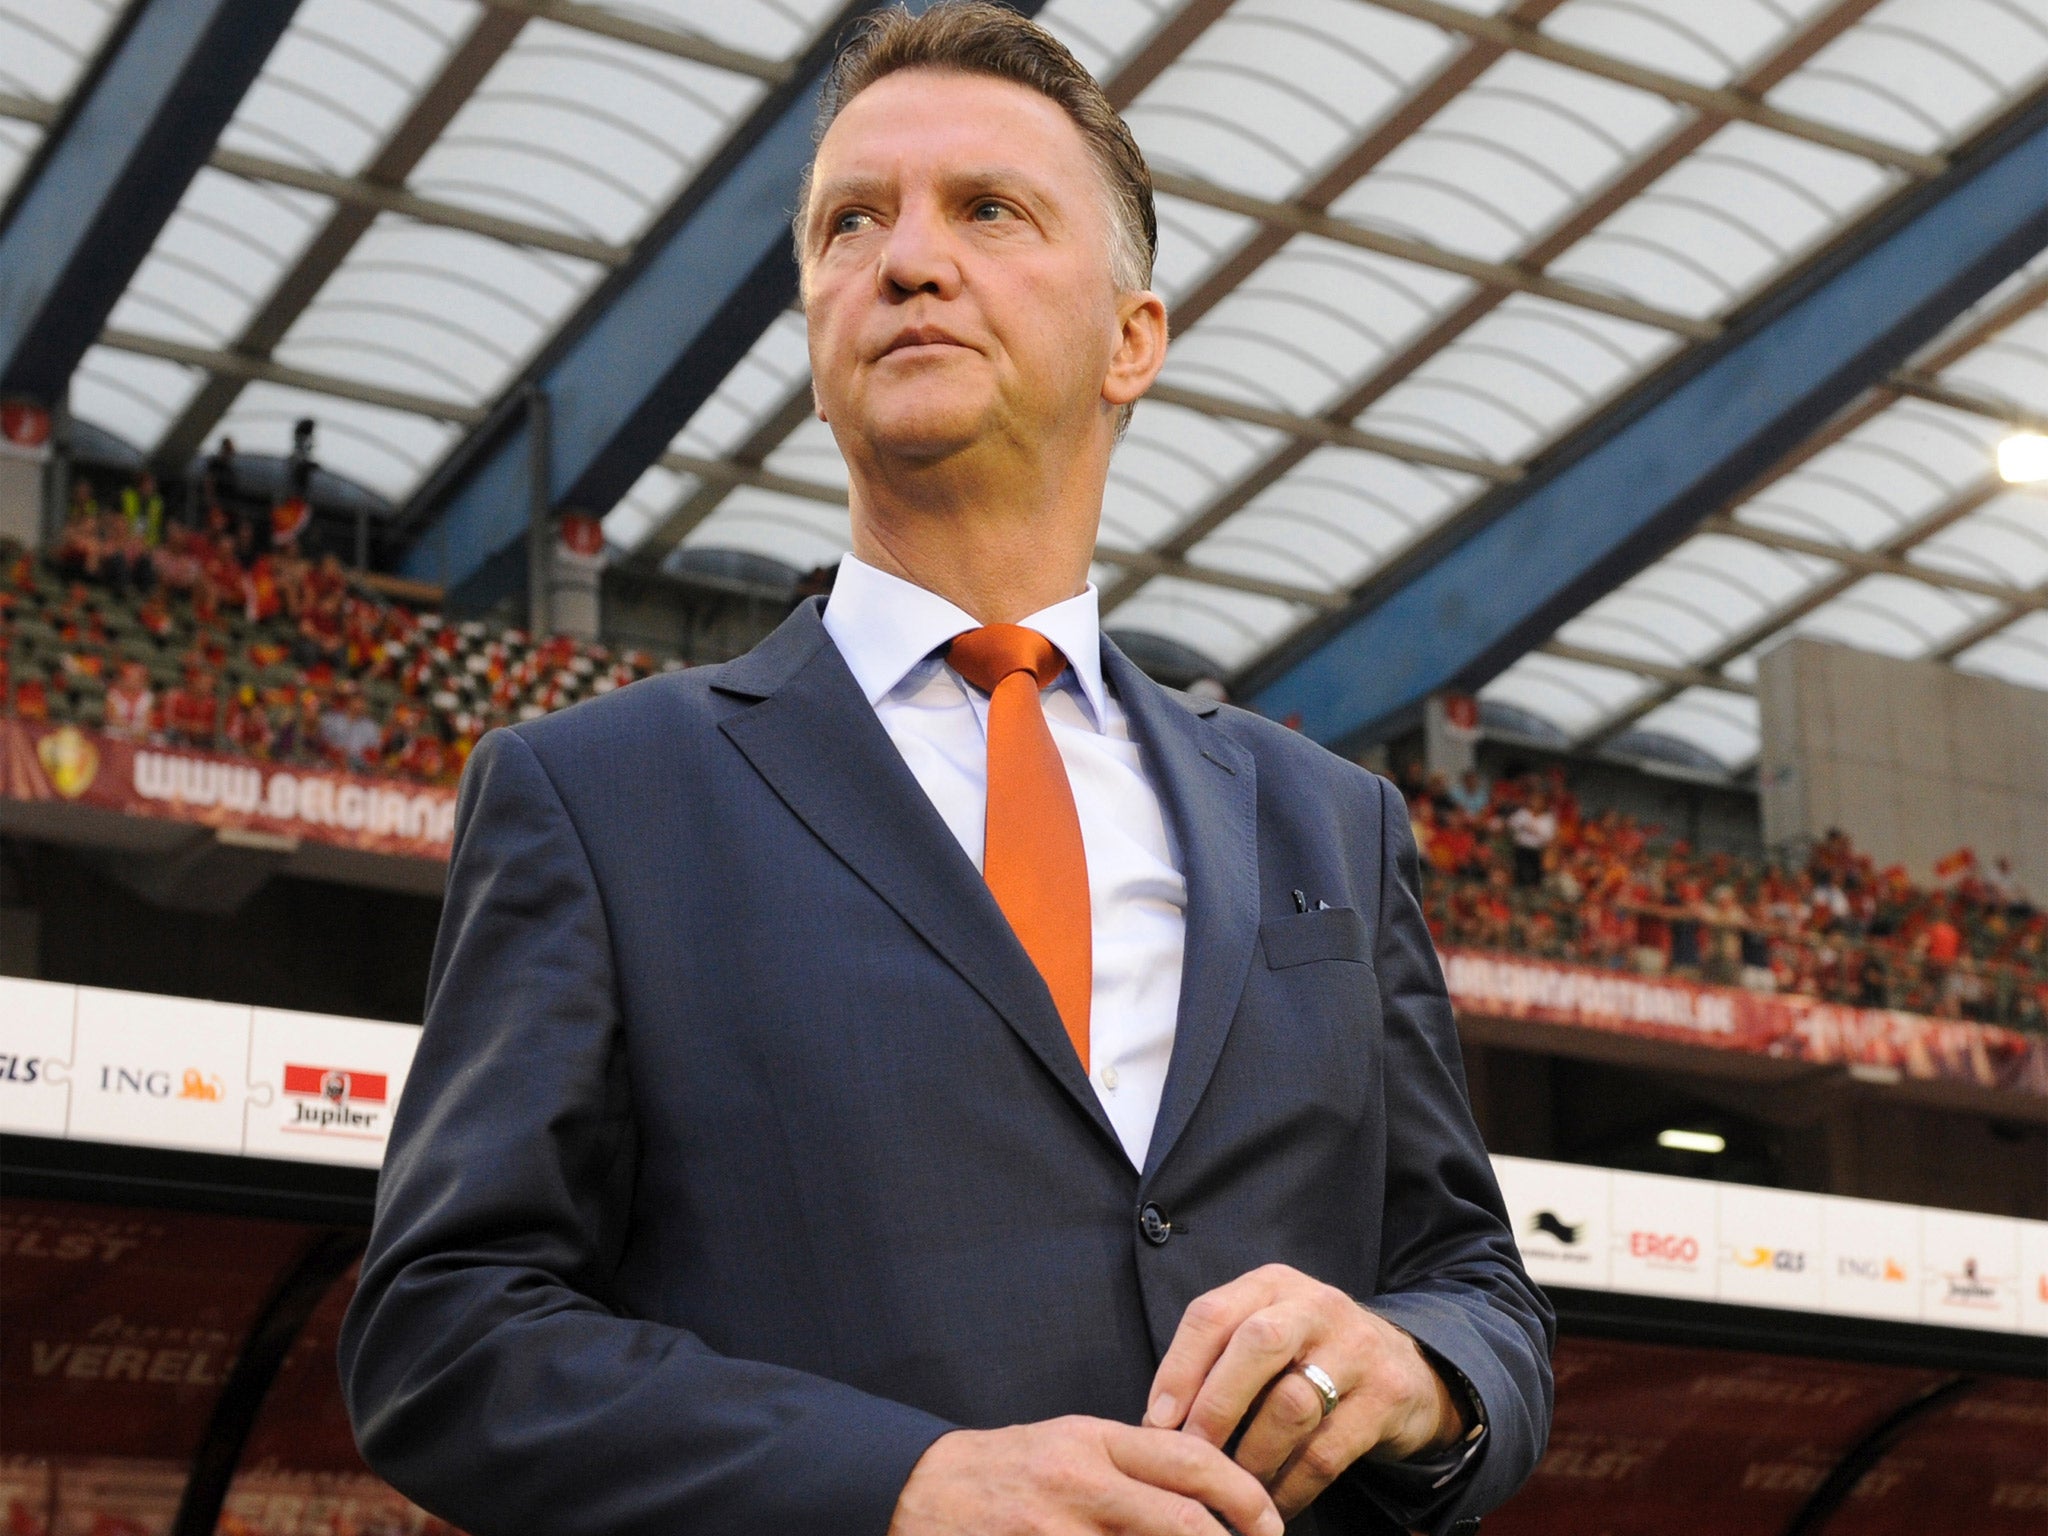 Louis van Gaal is expected to be appointed the Manchester Unite manager next week